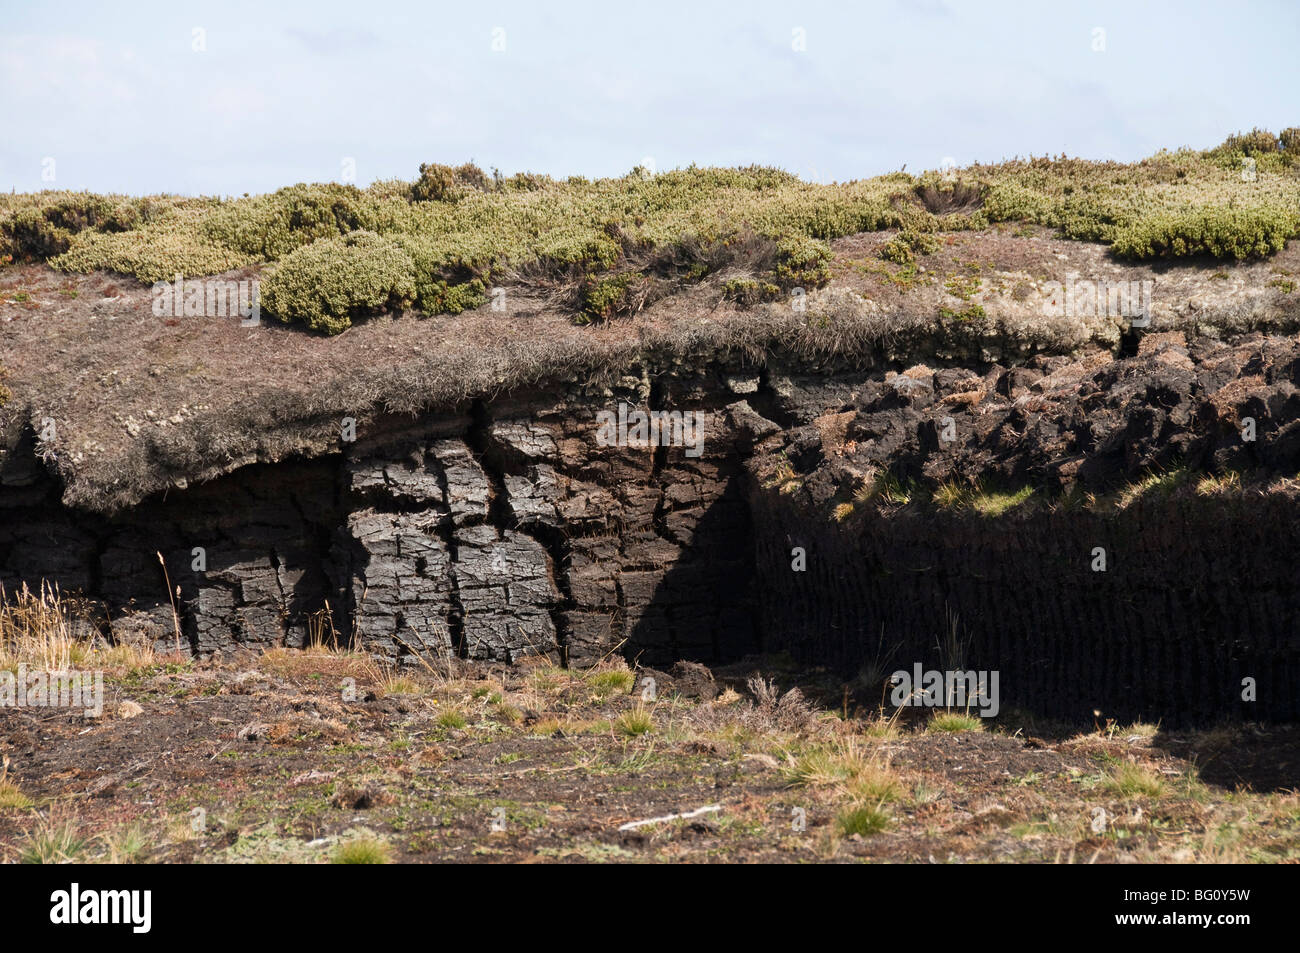 Peat used for fires, Port Stanley, Falkland Islands, South America Stock Photo